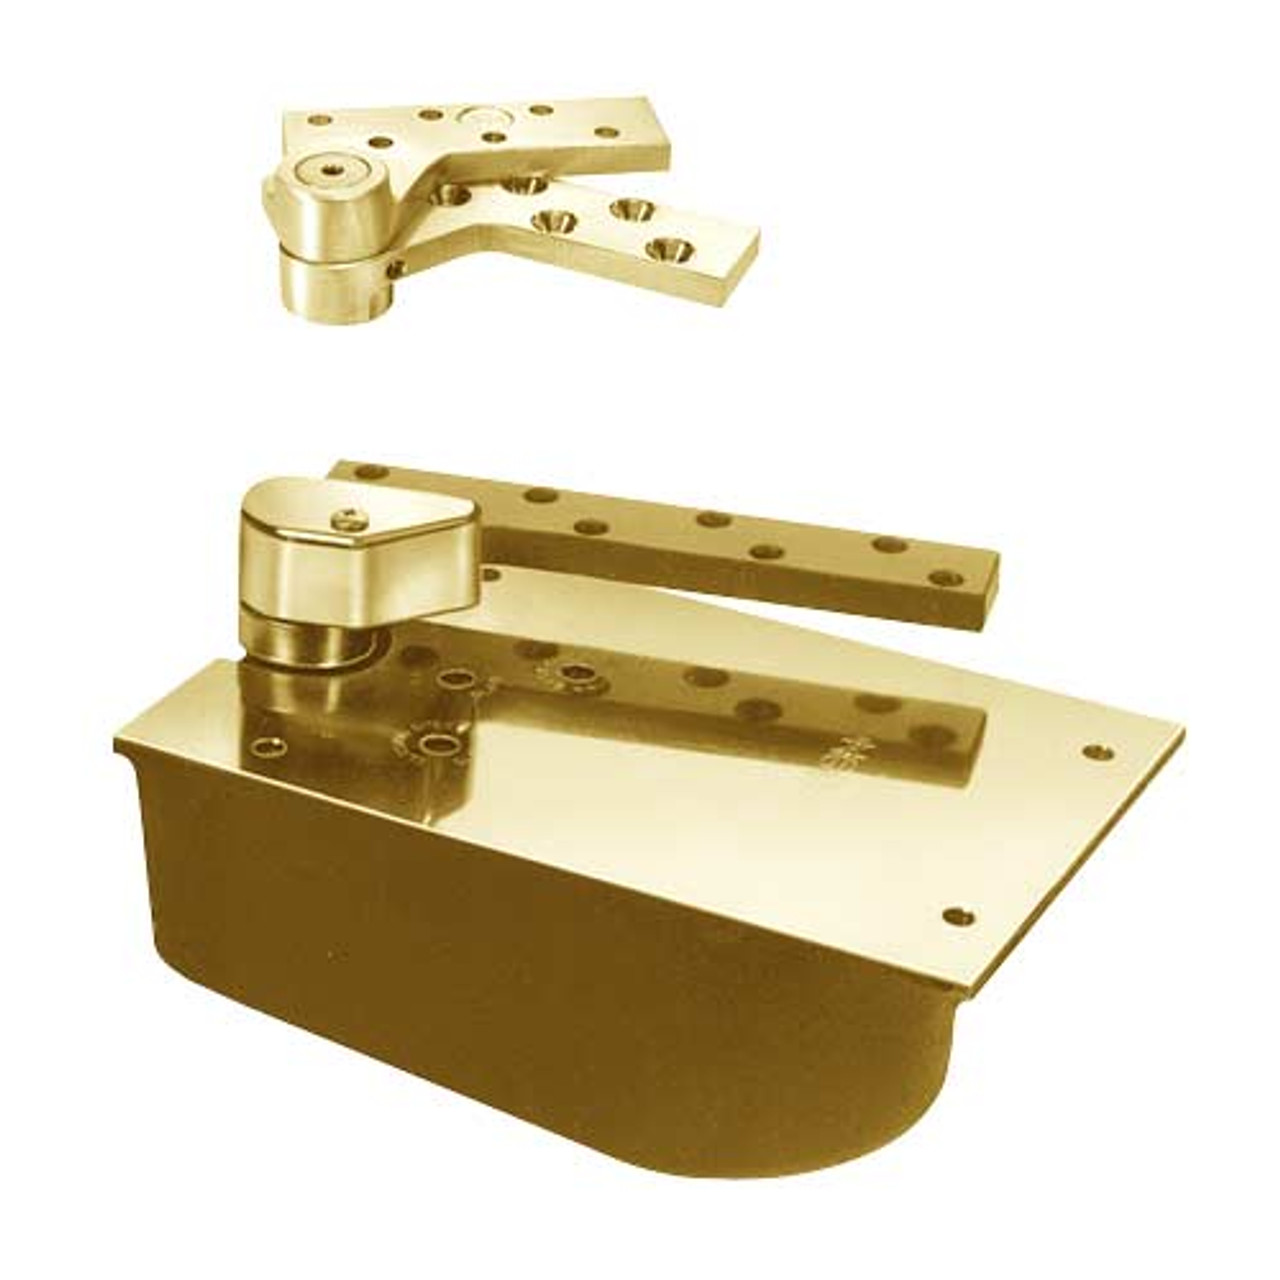 L27-90S-LTP-LH-3-605 Rixson 27 Series Extra Heavy Duty Lead Lined Offset Floor Closer in Bright Brass Finish